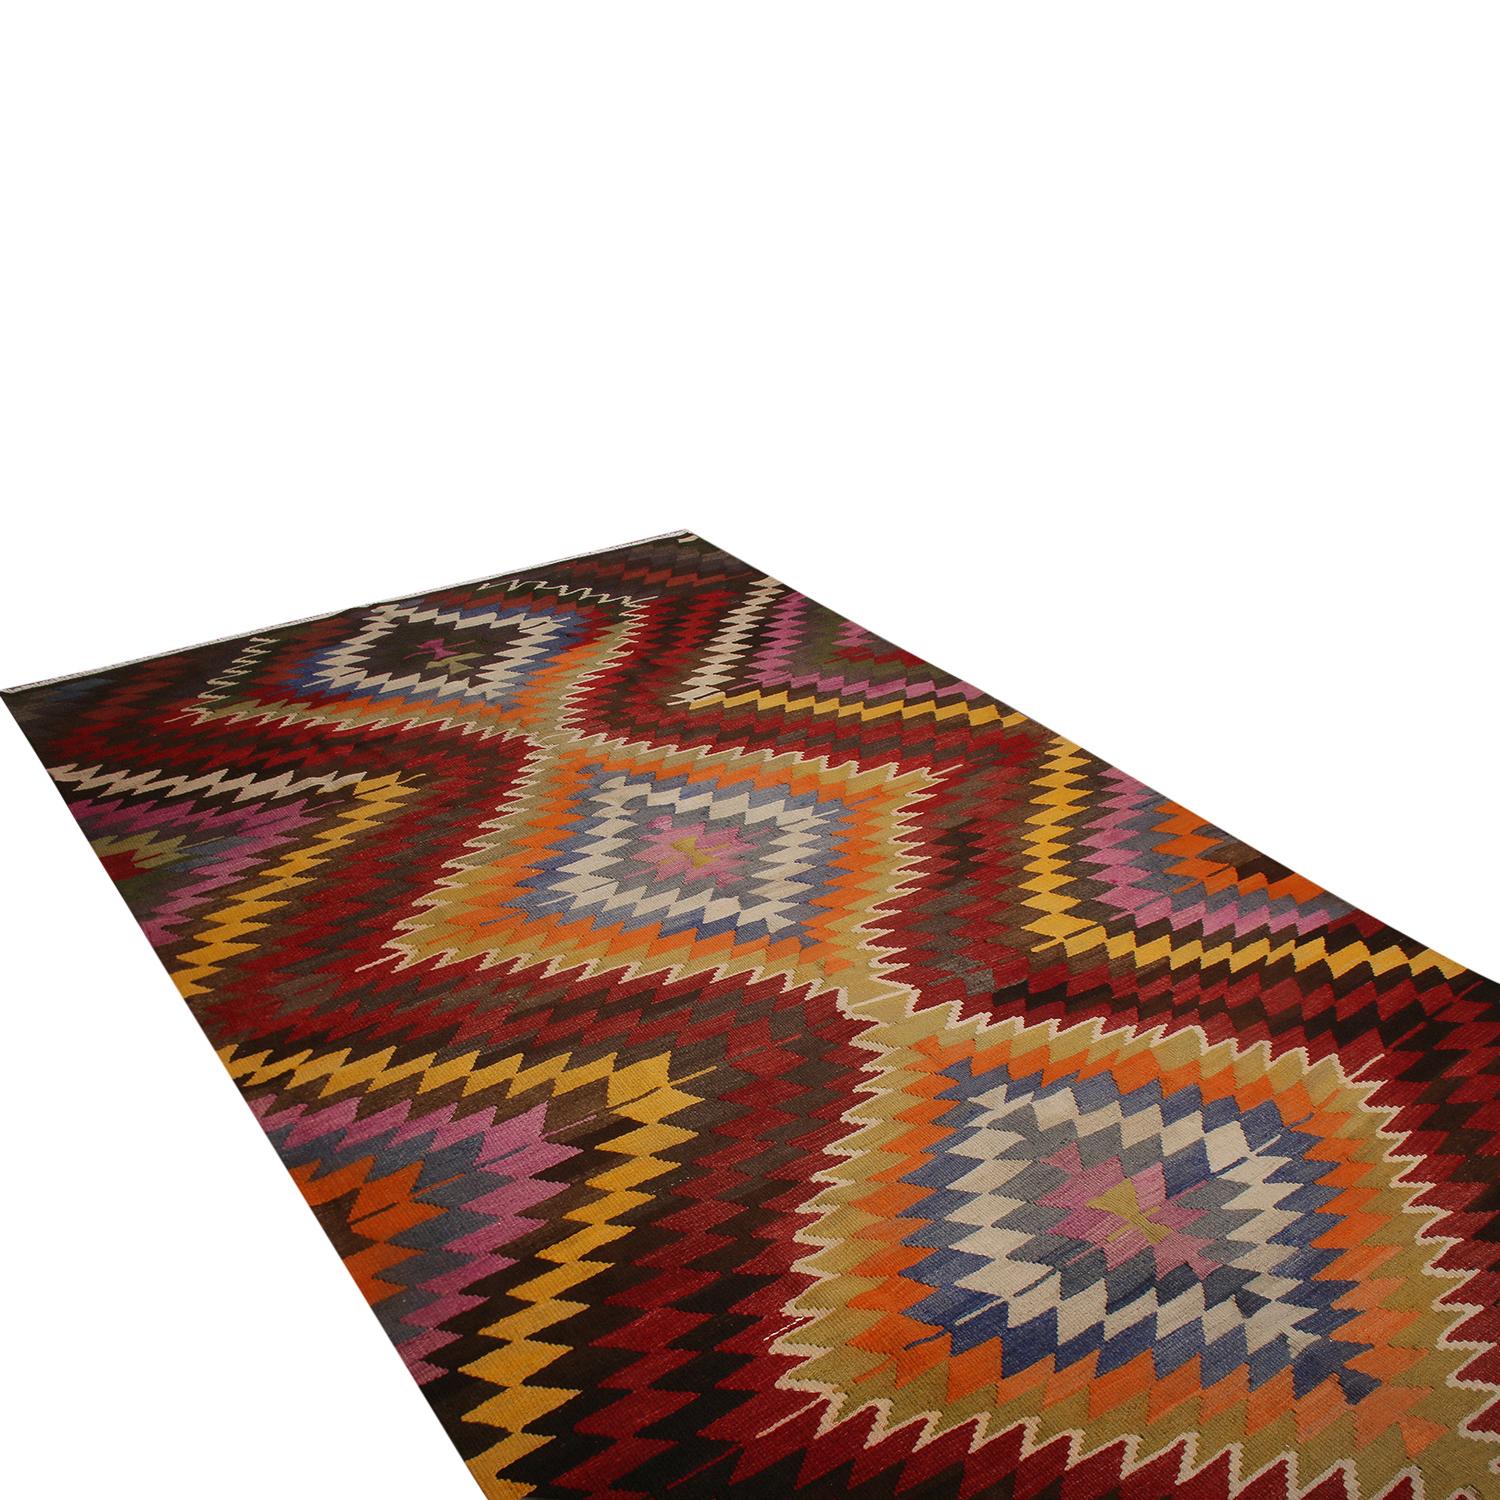 flat-woven in Turkey originating between 1950-1960, this vintage midcentury tribal Kilim hails from the town of Mut, celebrating a very idyllic but lively approach to tribal yellow, lavender purple, green, black, white, red, blue and orange colorway